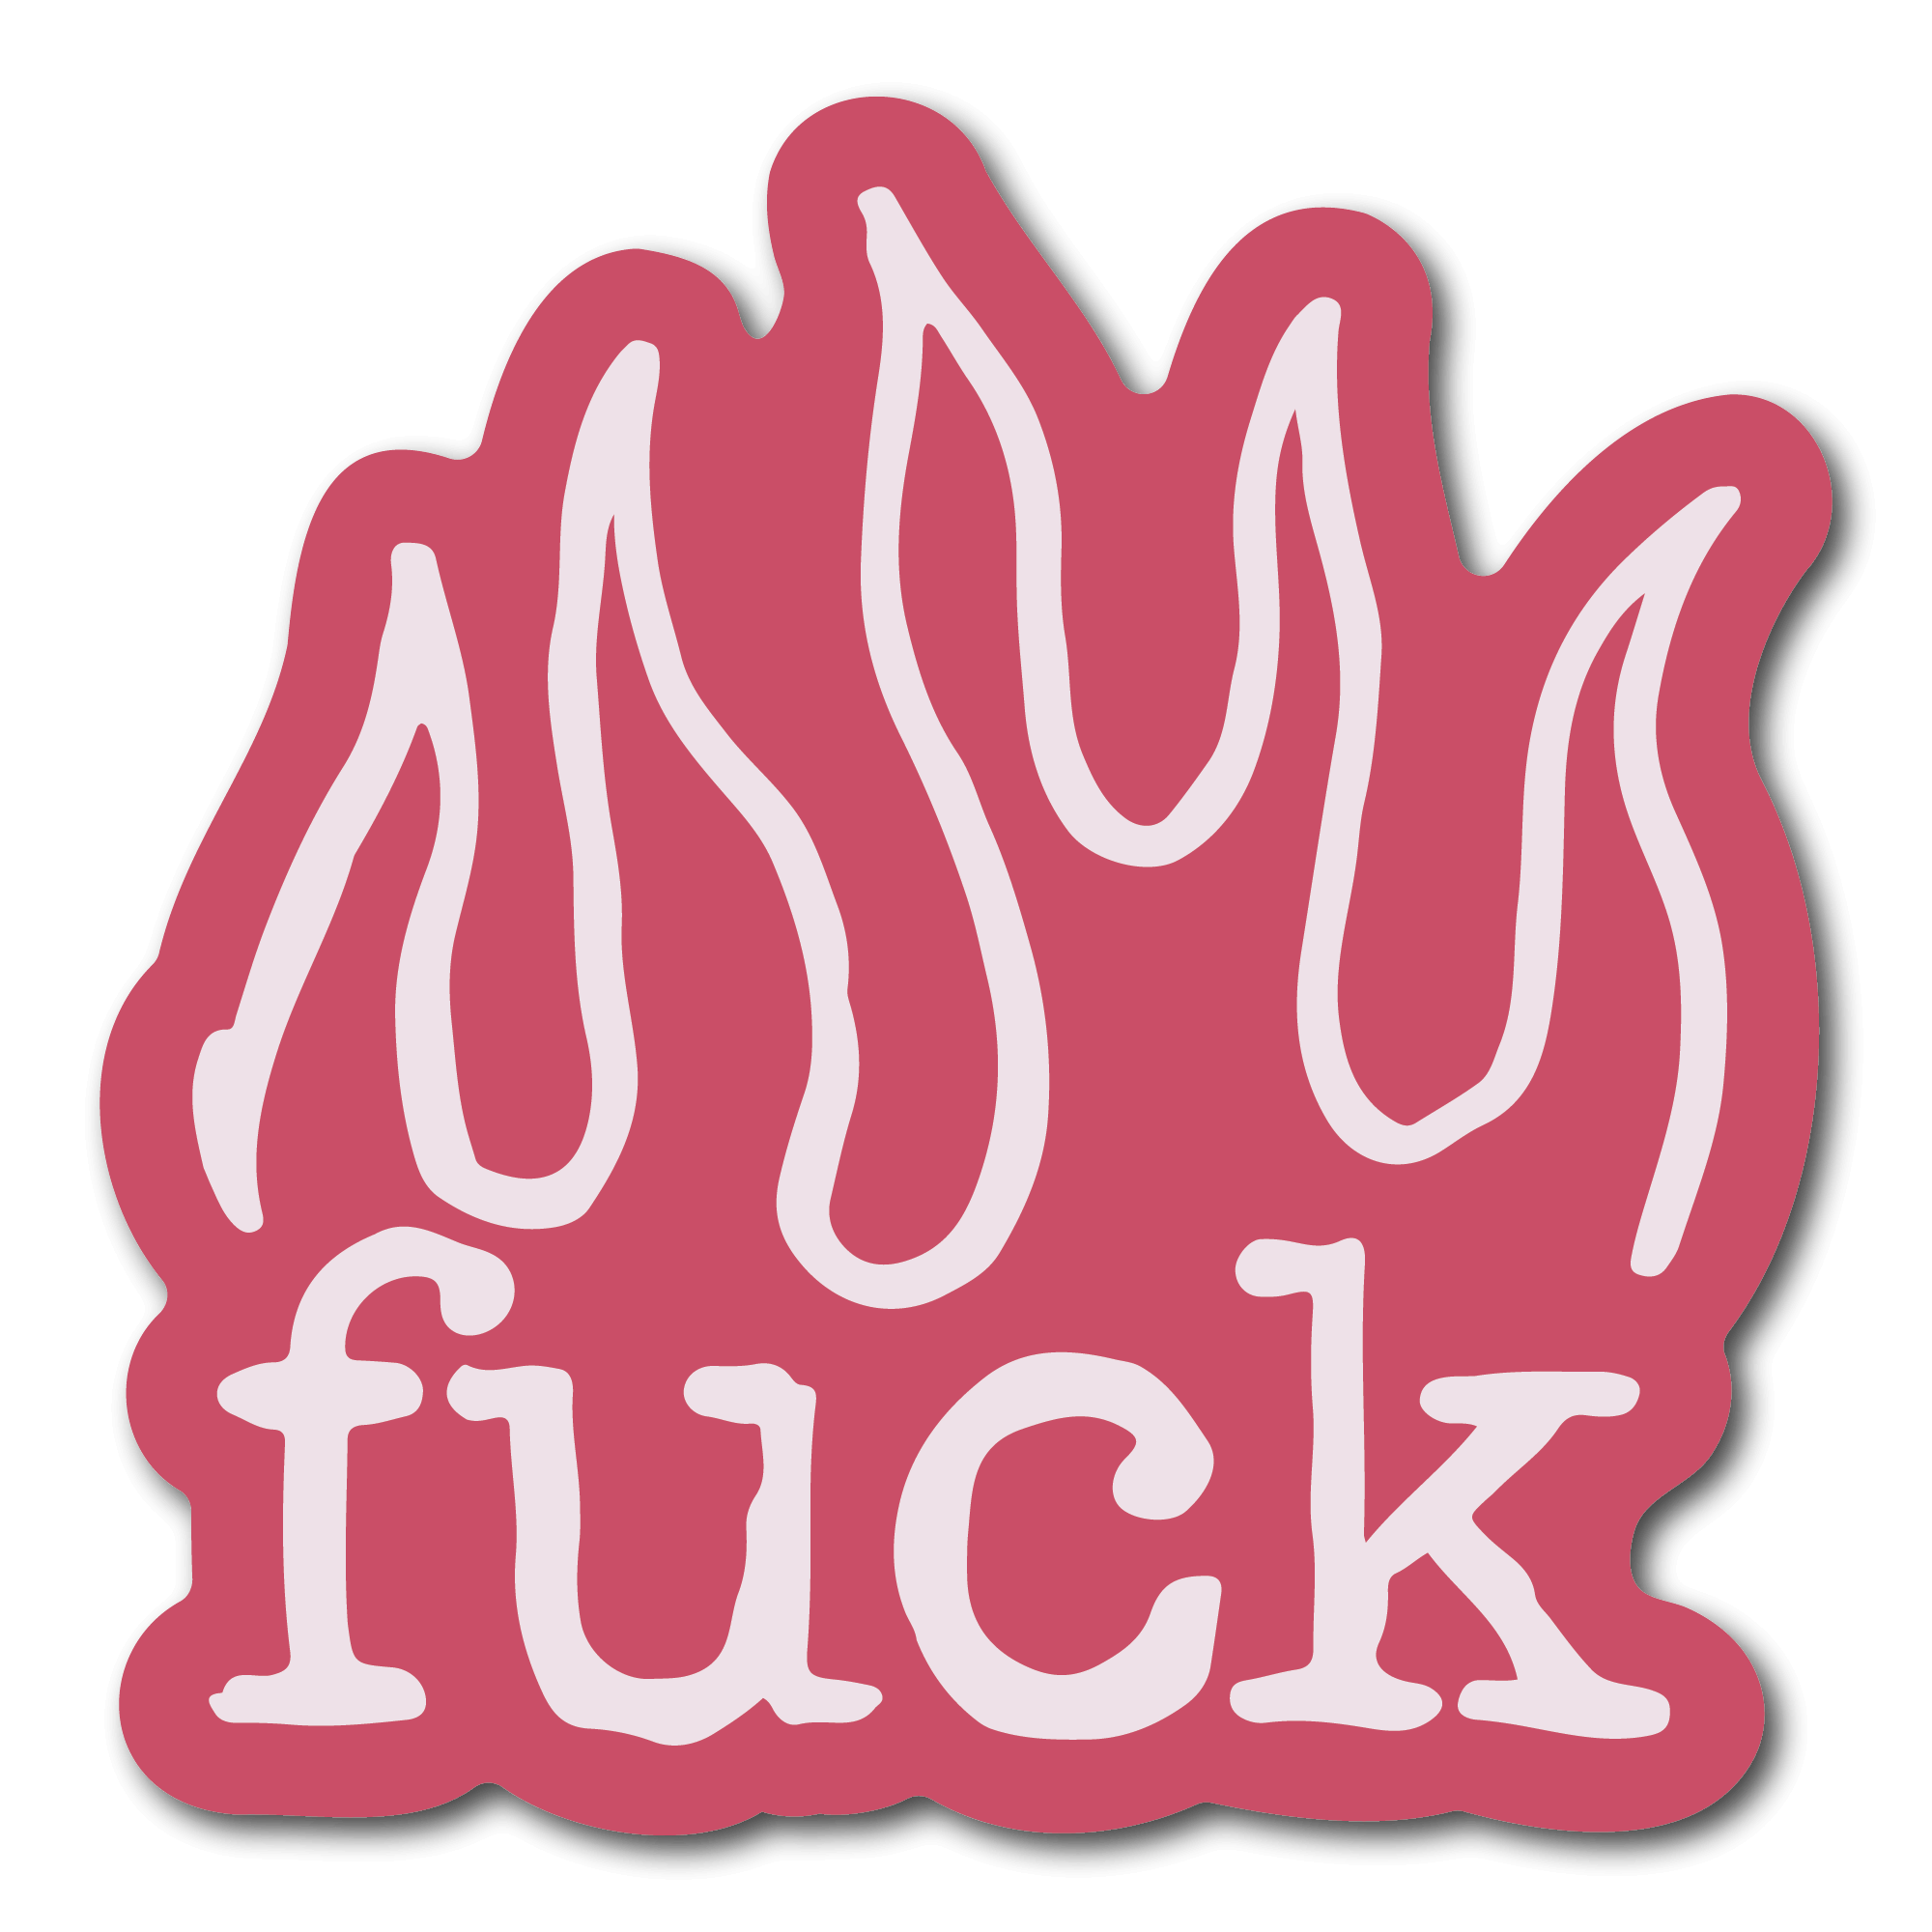 Small Pink Sticker that says fuck with flames over it